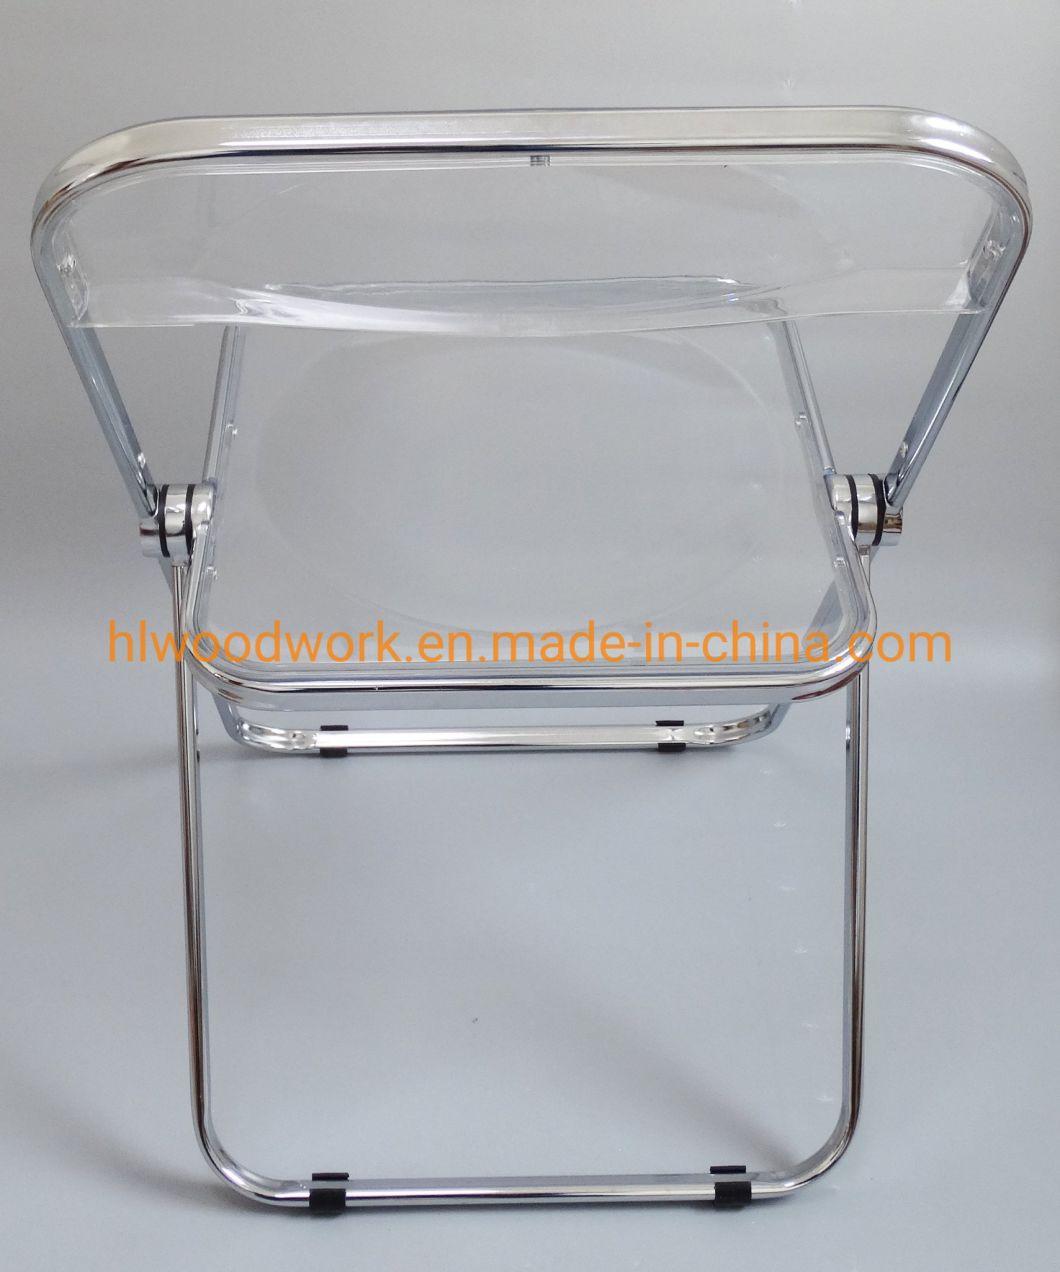 Modern Transparent Brown Folding Chair PC Plastic Hotel Chairt Chrome Frame Office Bar Dining Leisure Banquet Wedding Meeting Chair Plastic Dining Chair